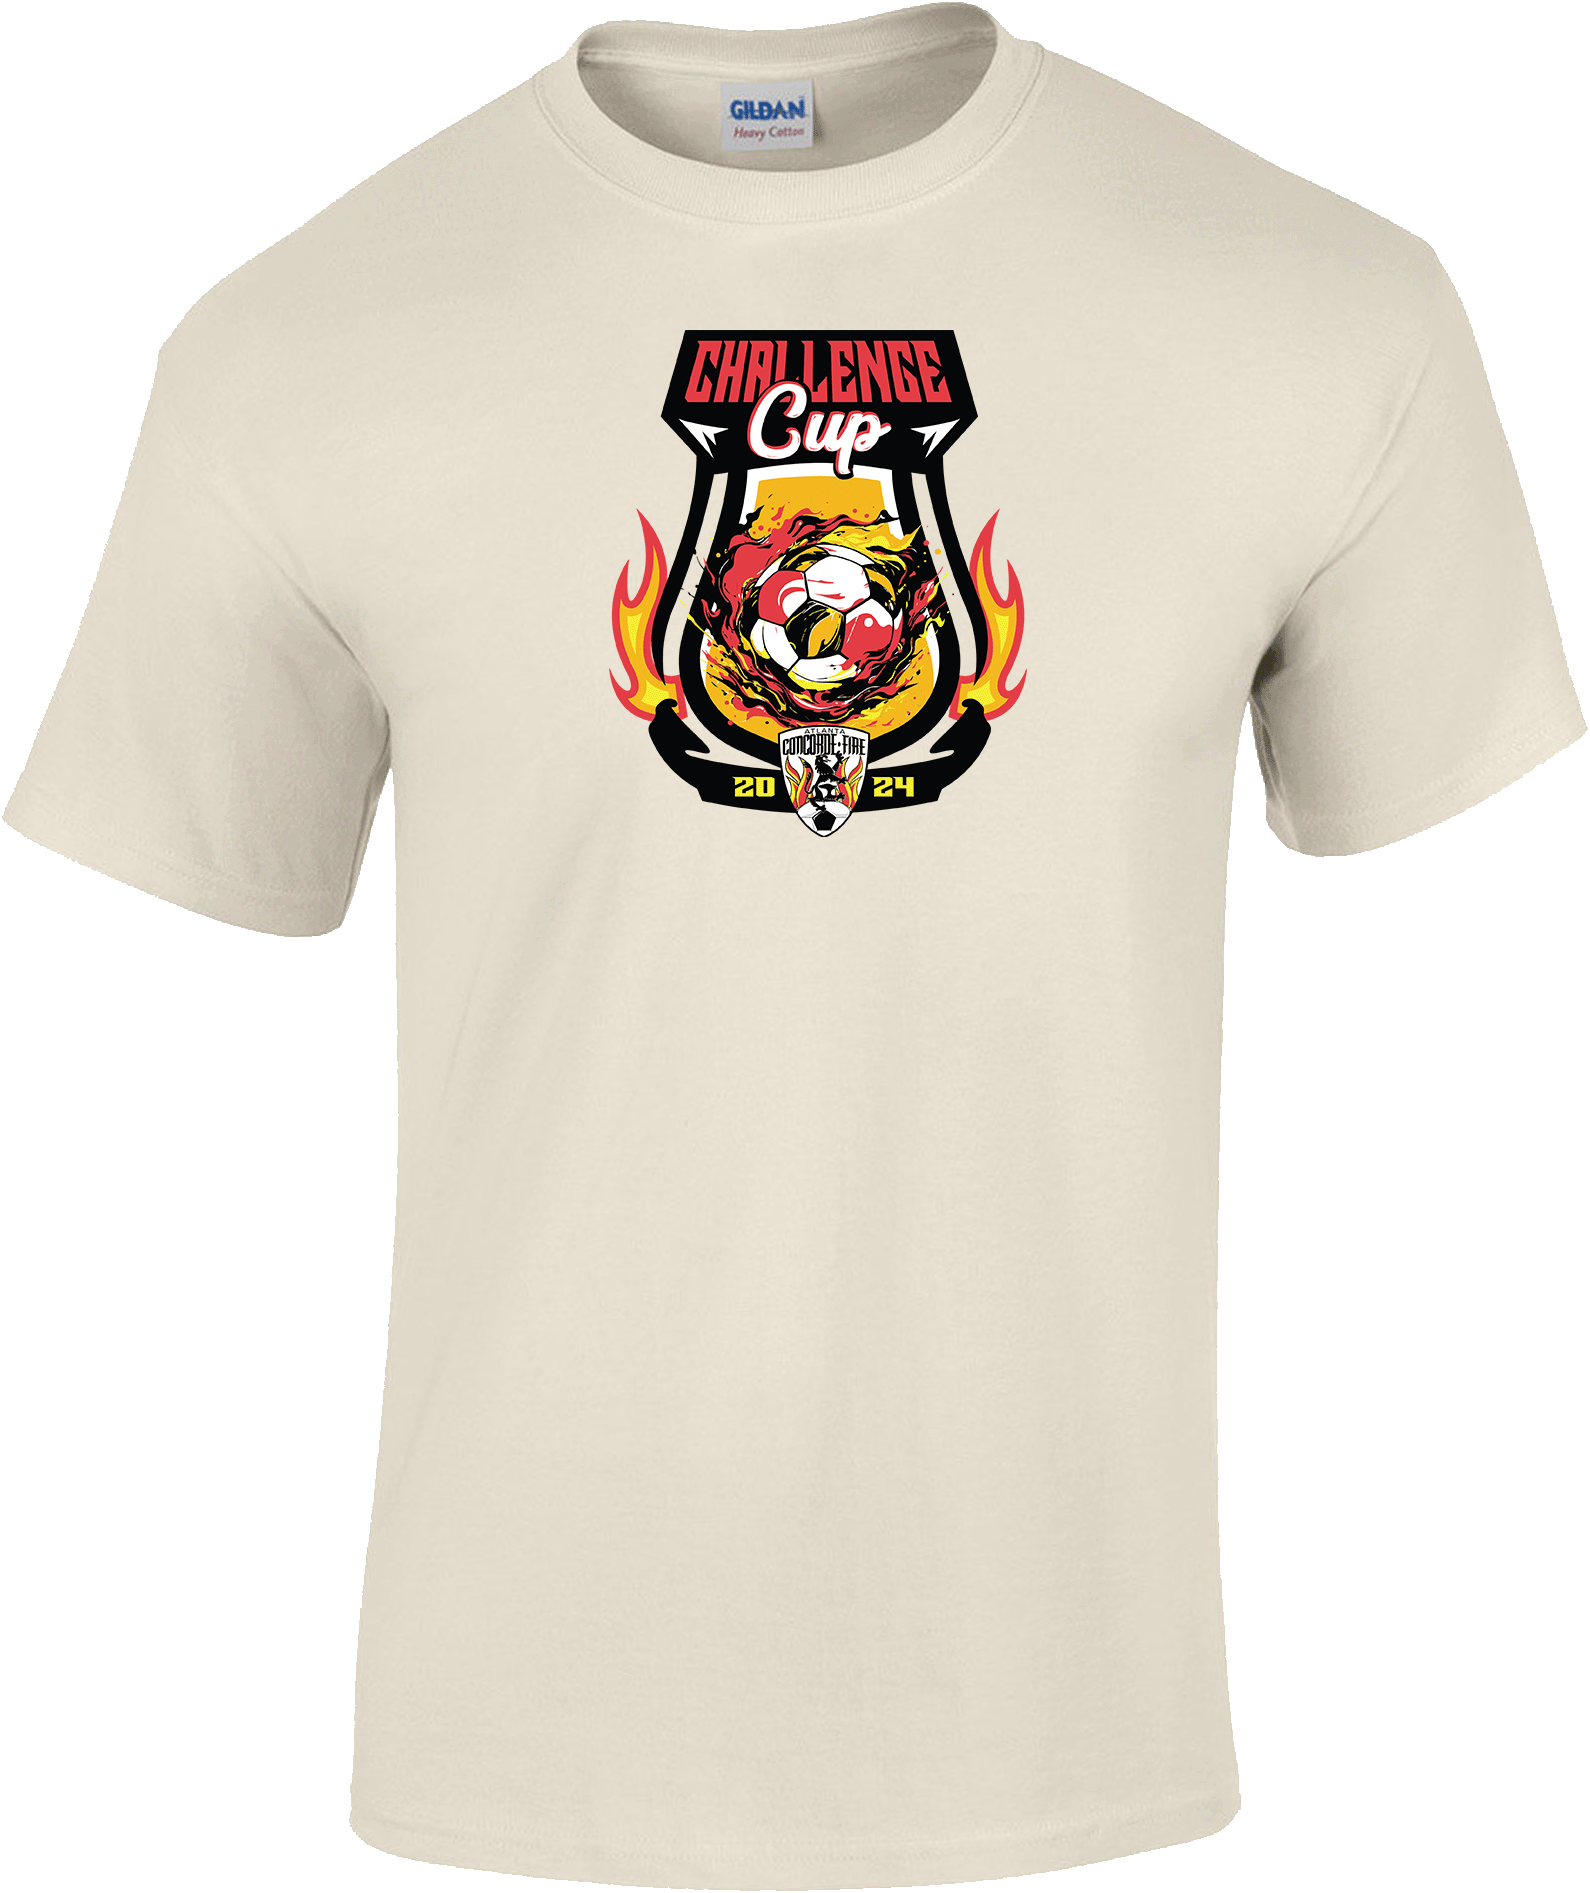 Short Sleeves - 2024 Challenge Cup